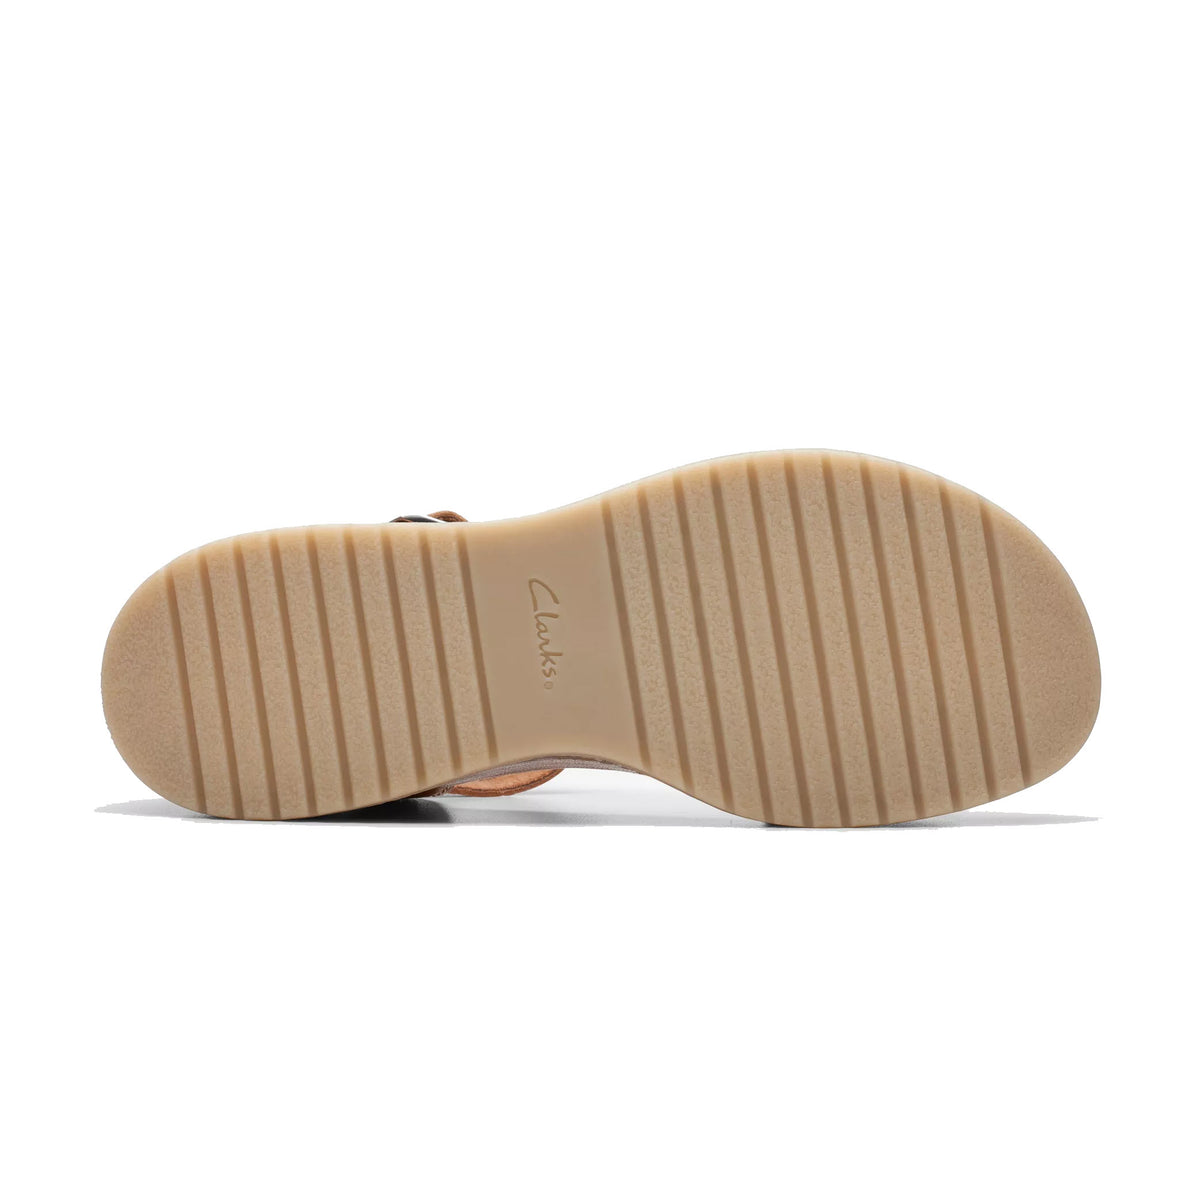 Sole of a Clarks Kassandra Lily Tan shoe, showing a flat beige surface with horizontal grooves and the Clarks brand name embossed in the center, featuring a Contour Cushion footbed for added comfort.